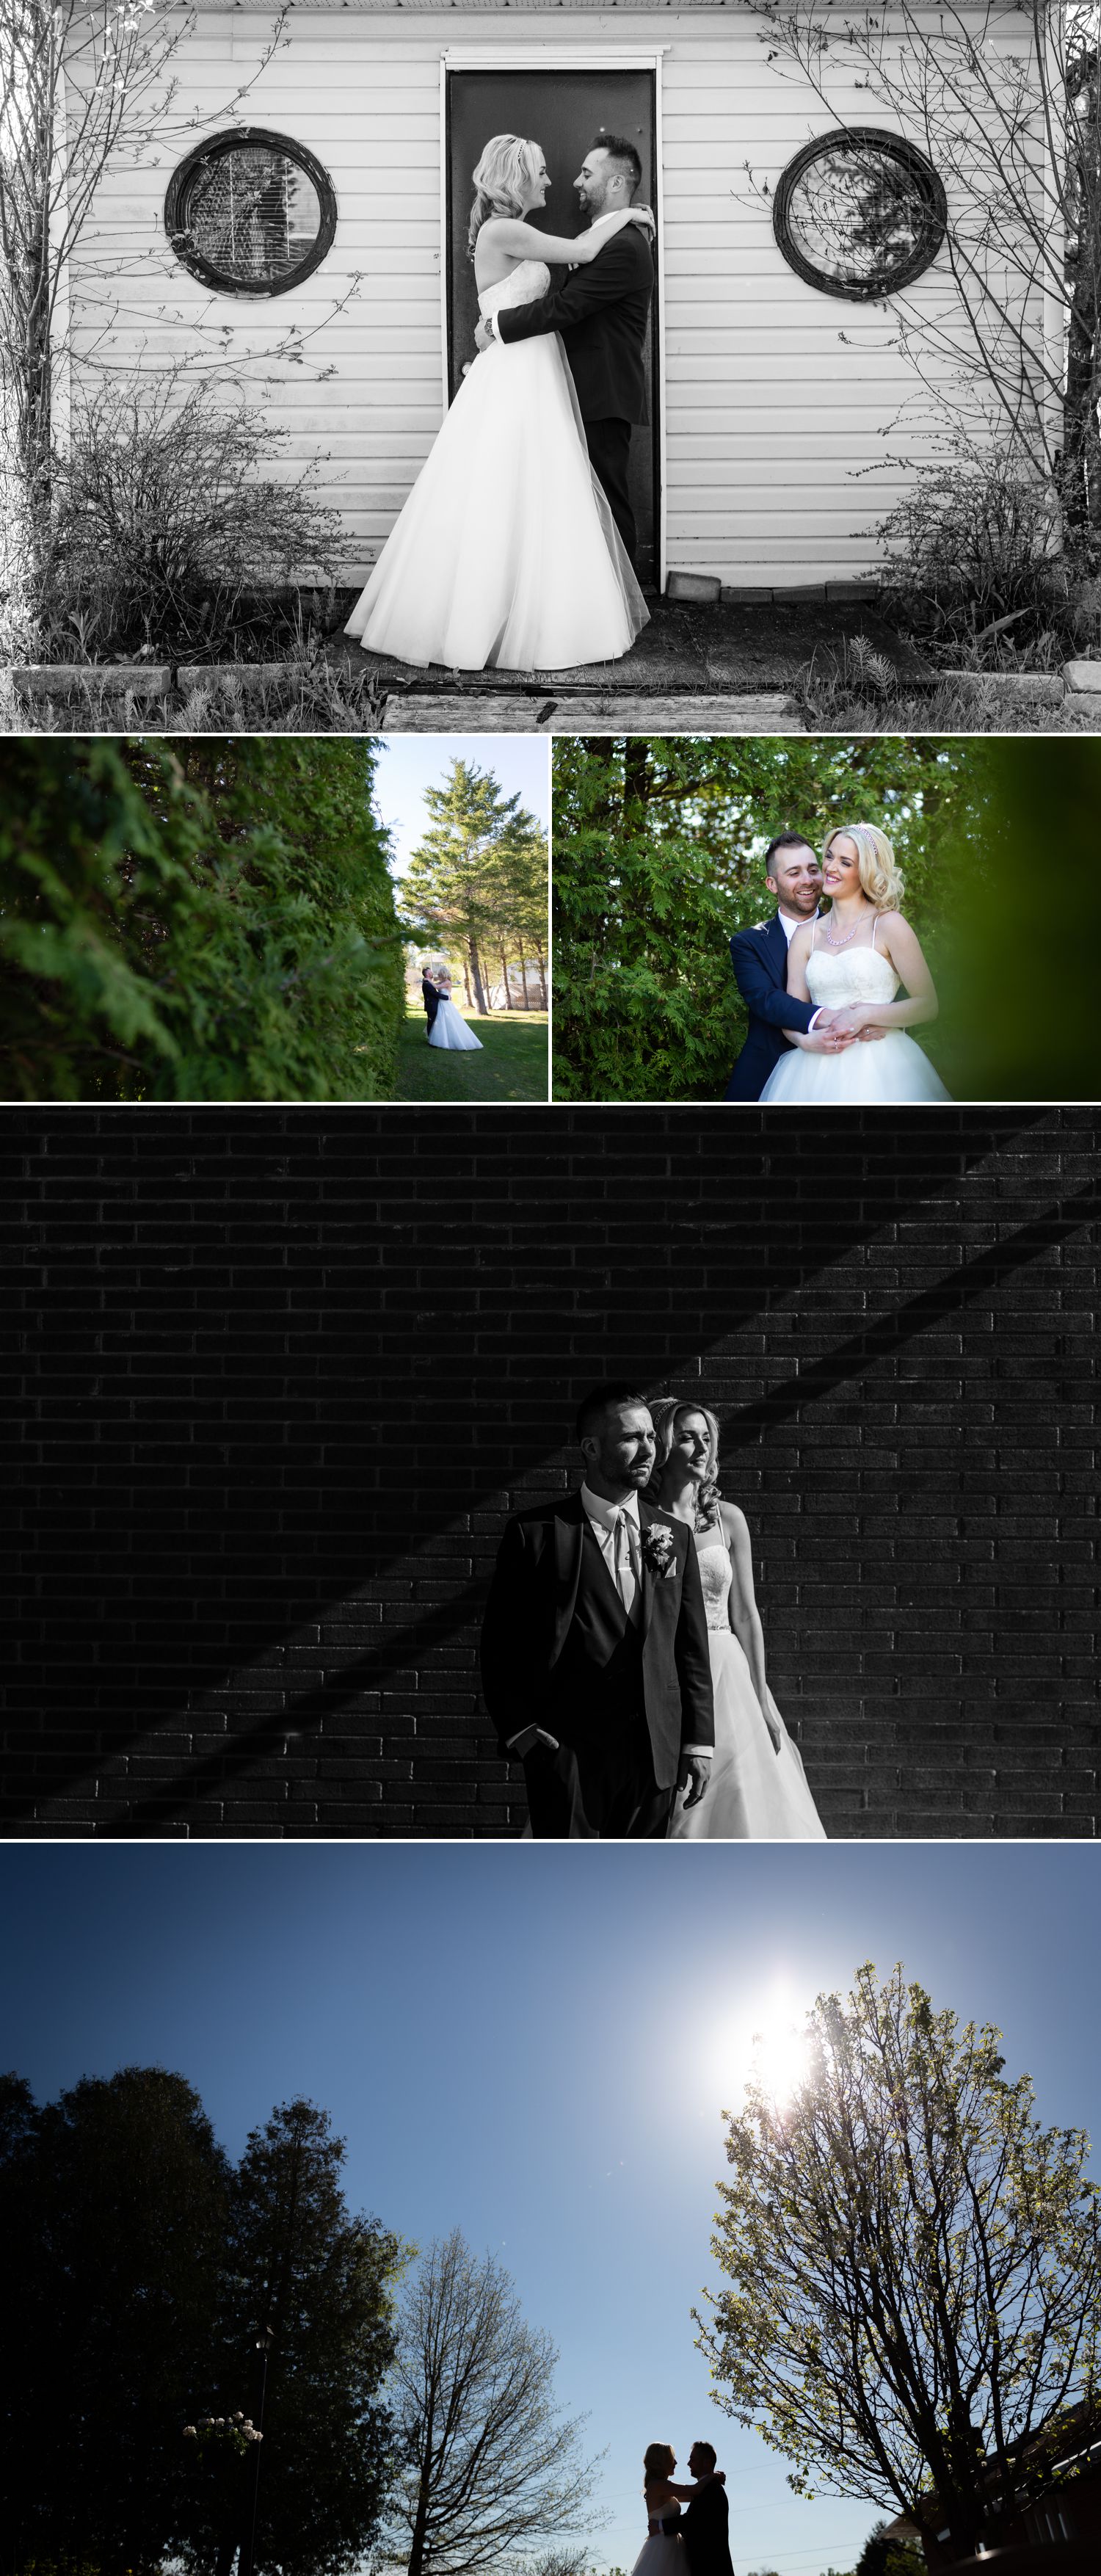 Portraits of the bride and groom after their wedding ceremony at Orchard View Wedding and Conference Centre